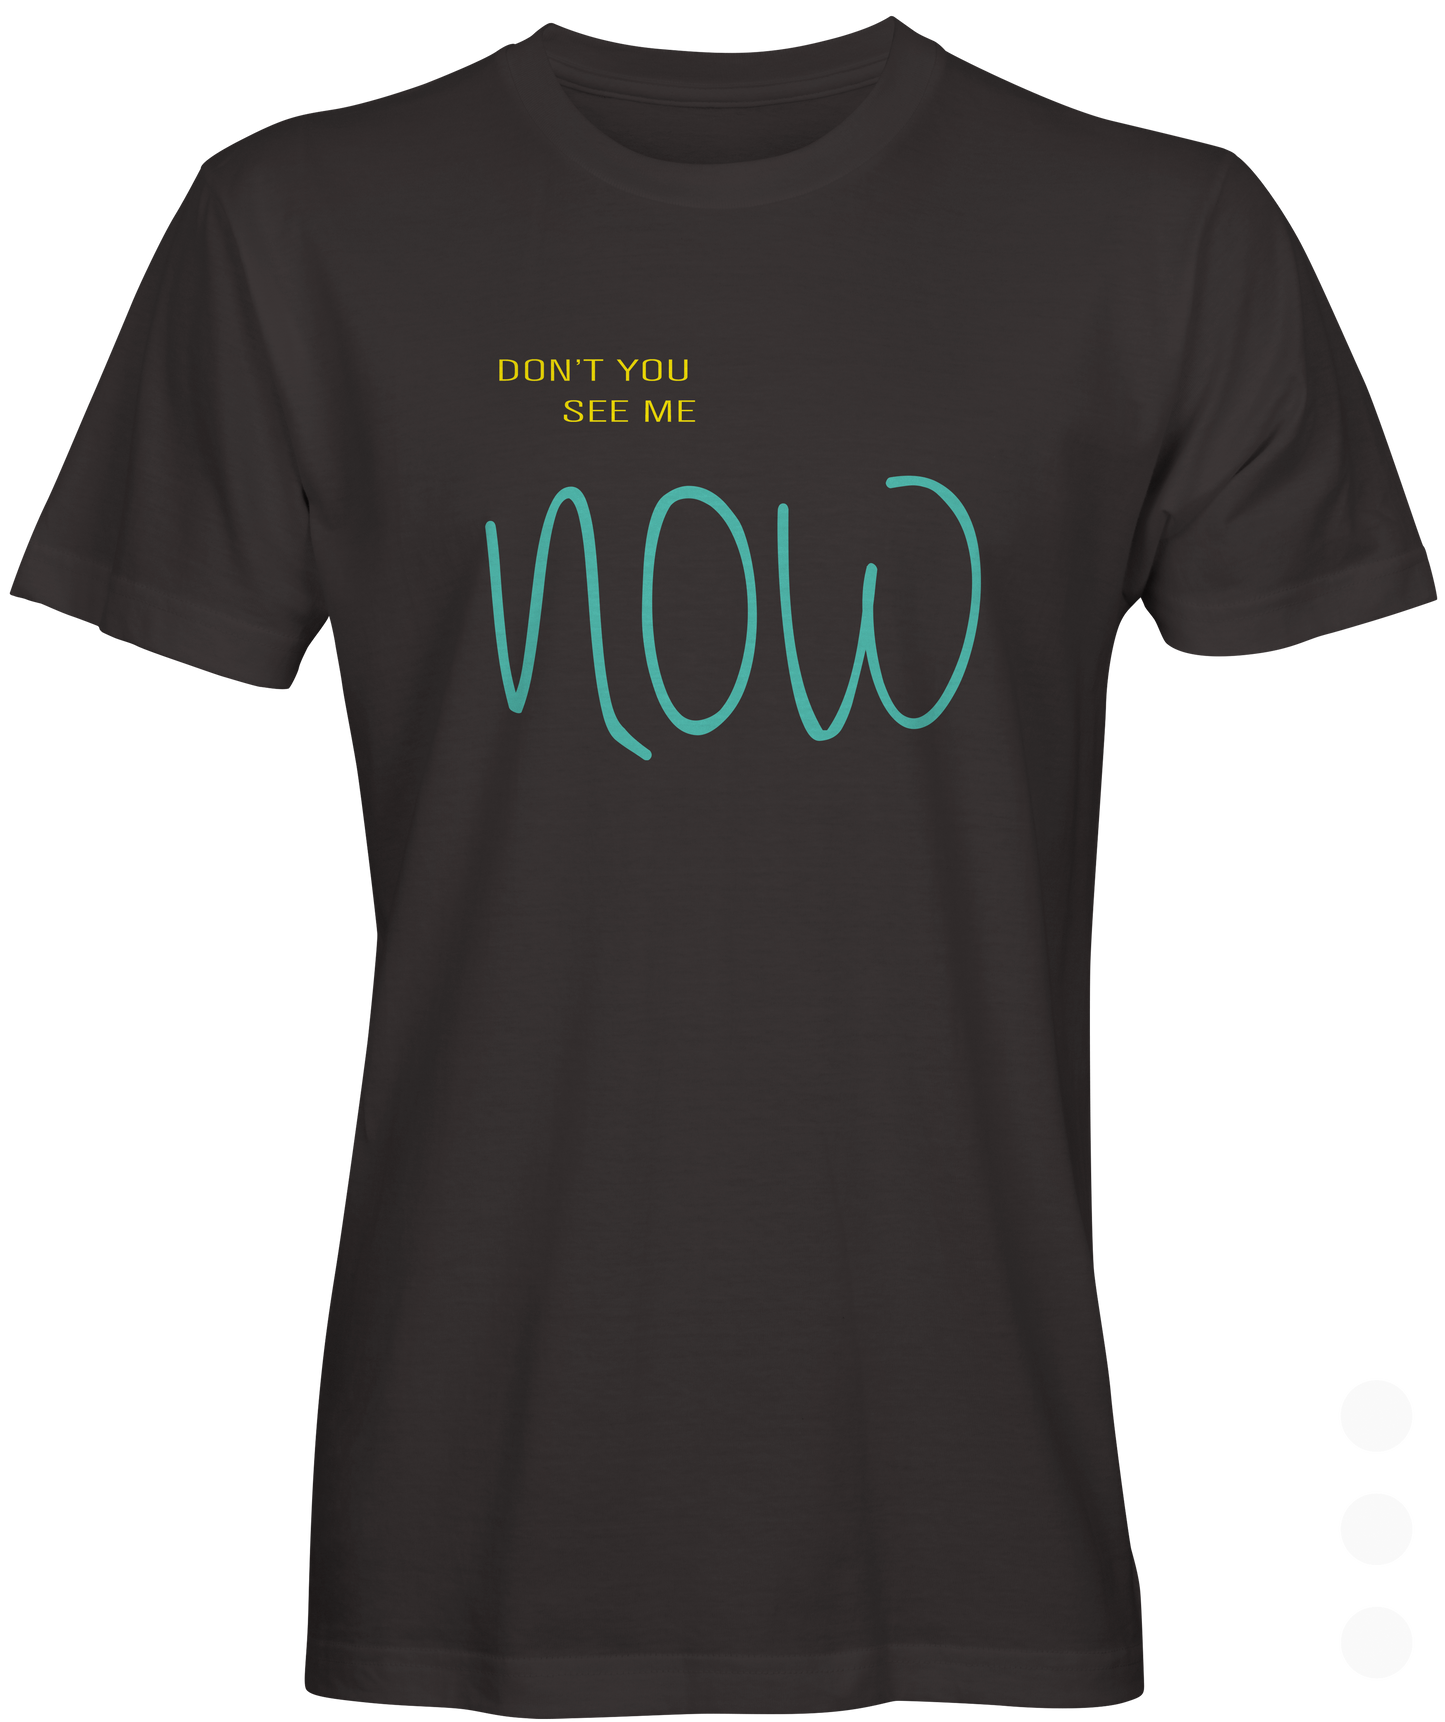 See Me Now Slogan T-shirt